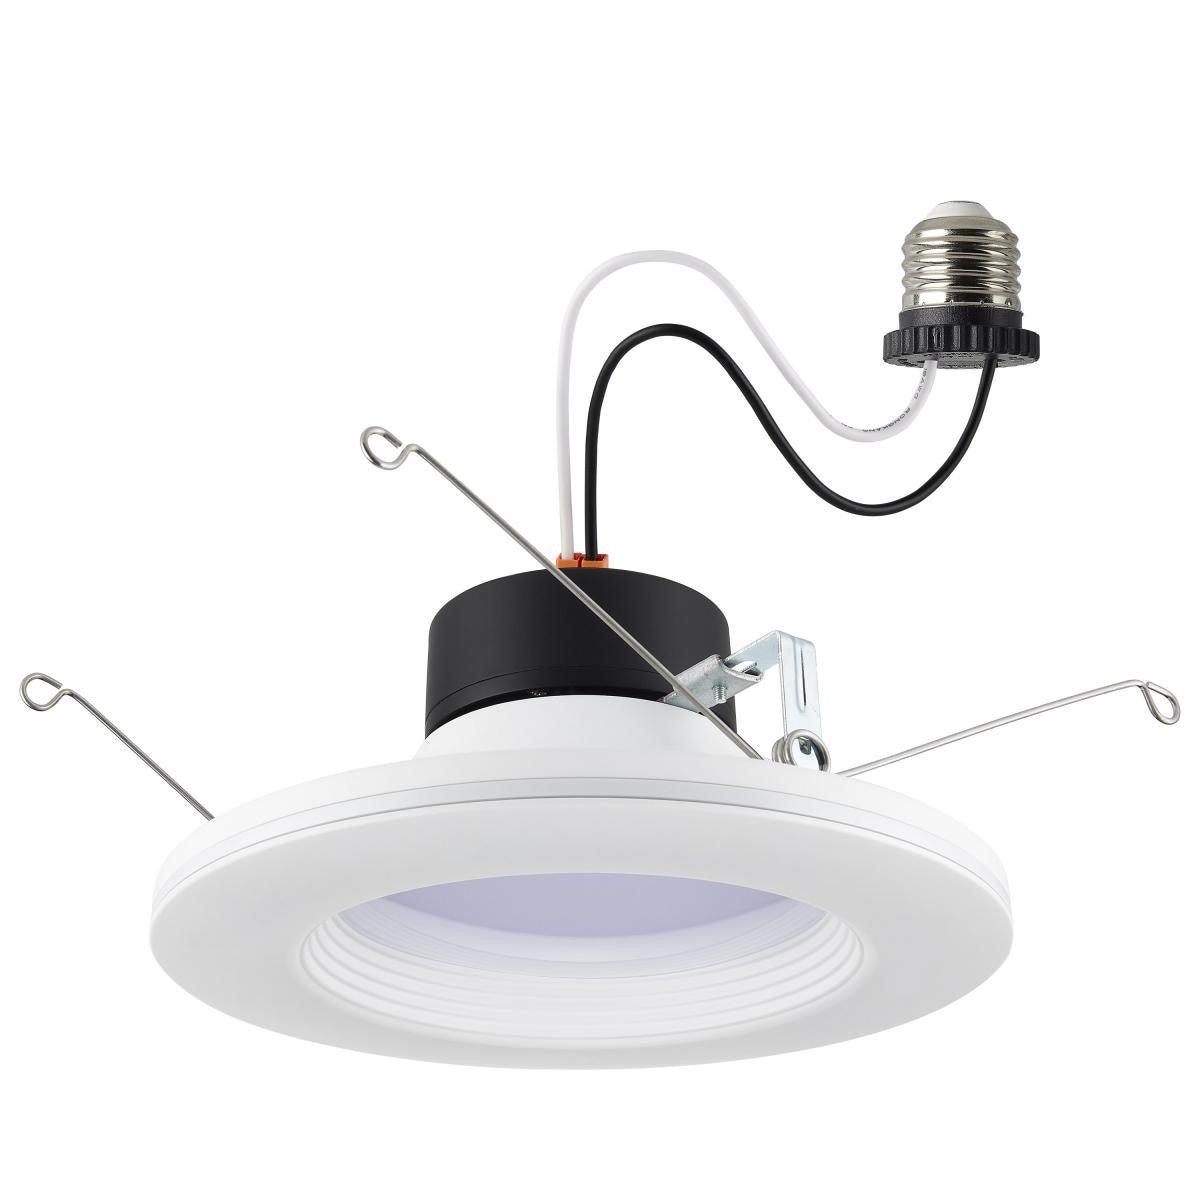 6 In. Recessed LED Can Light, 9 Watt, 800 Lumens, Selectable CCT, 2700K to 5000K, Baffle Trim with Night Light - Bees Lighting